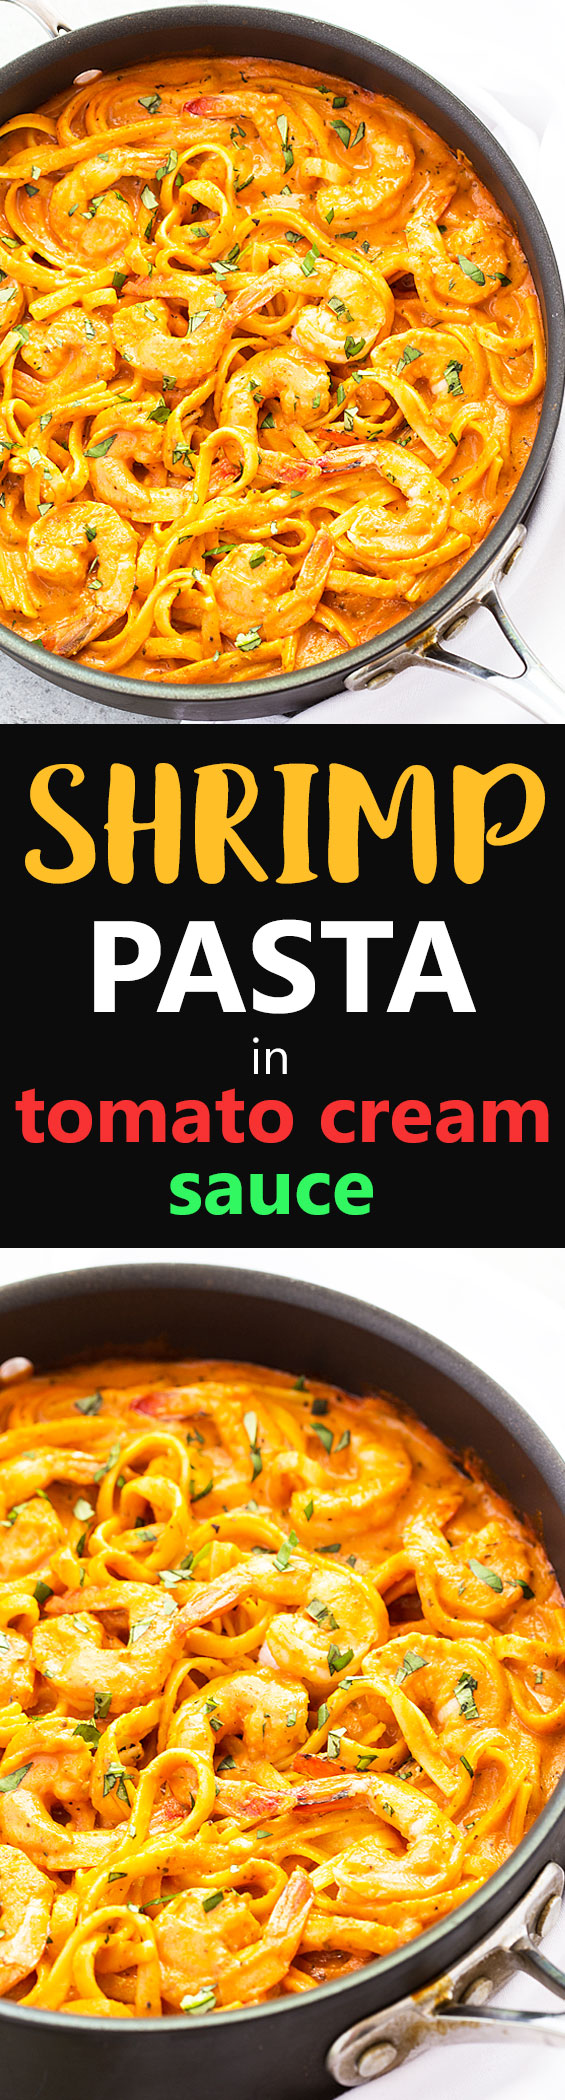 A two image vertical collage of one pan shrimp and pasta in tomato cream sauce with overlay text.